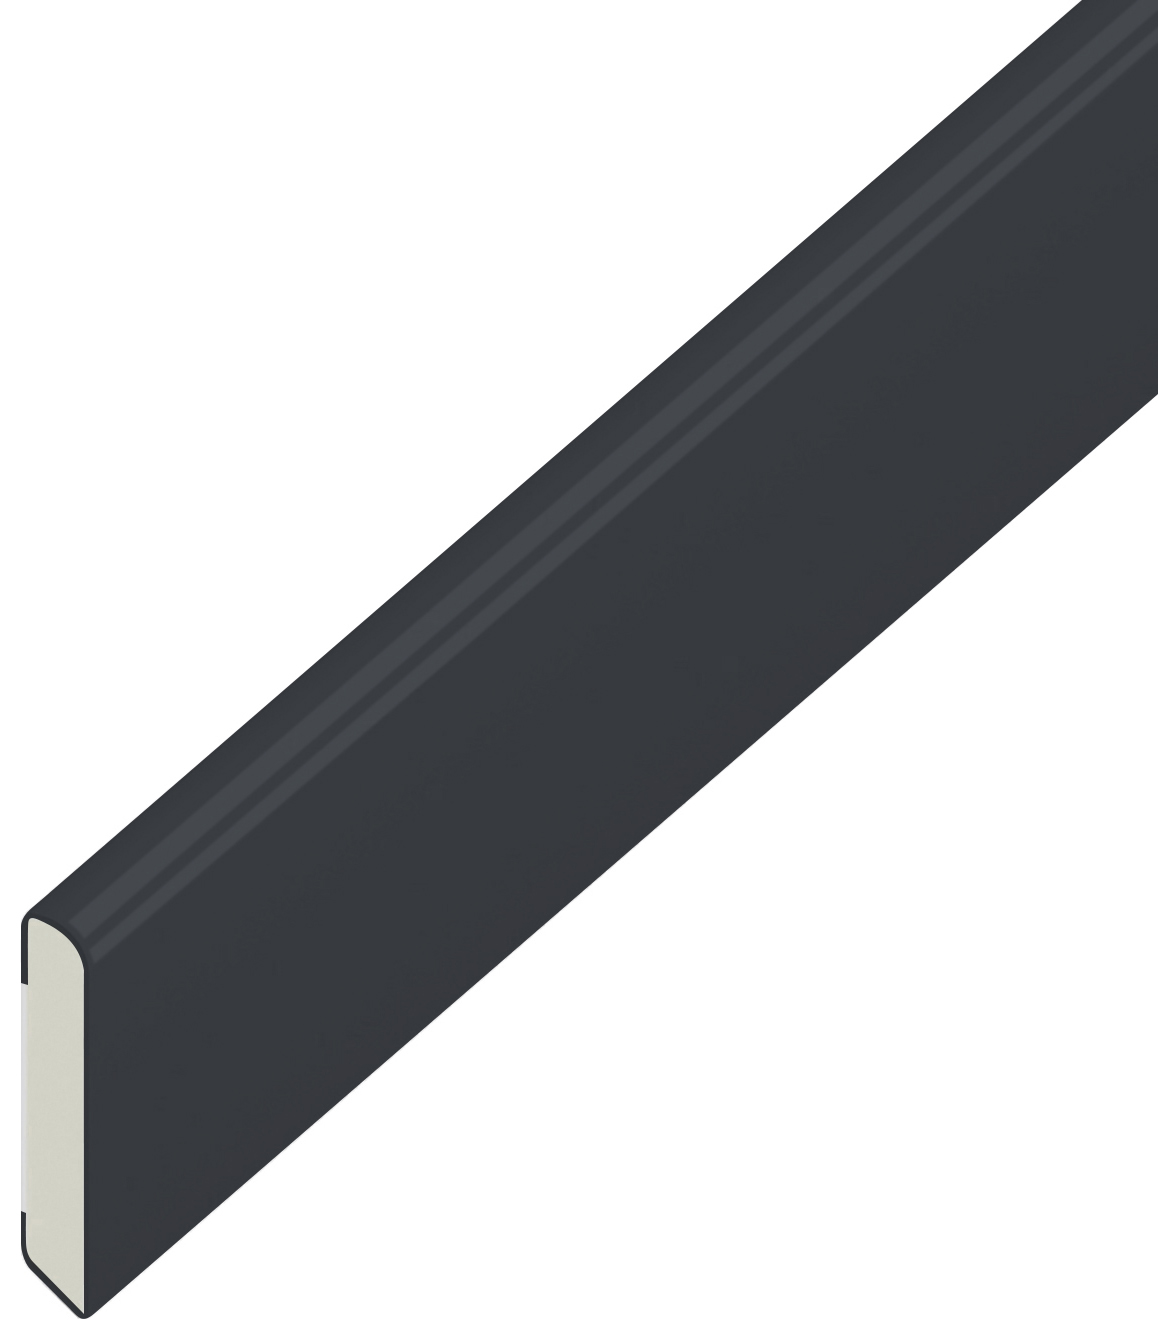 Wickes PVCu Anthracite Grey Cloaking Profile - 30mm x 2.5m - Pack of 5